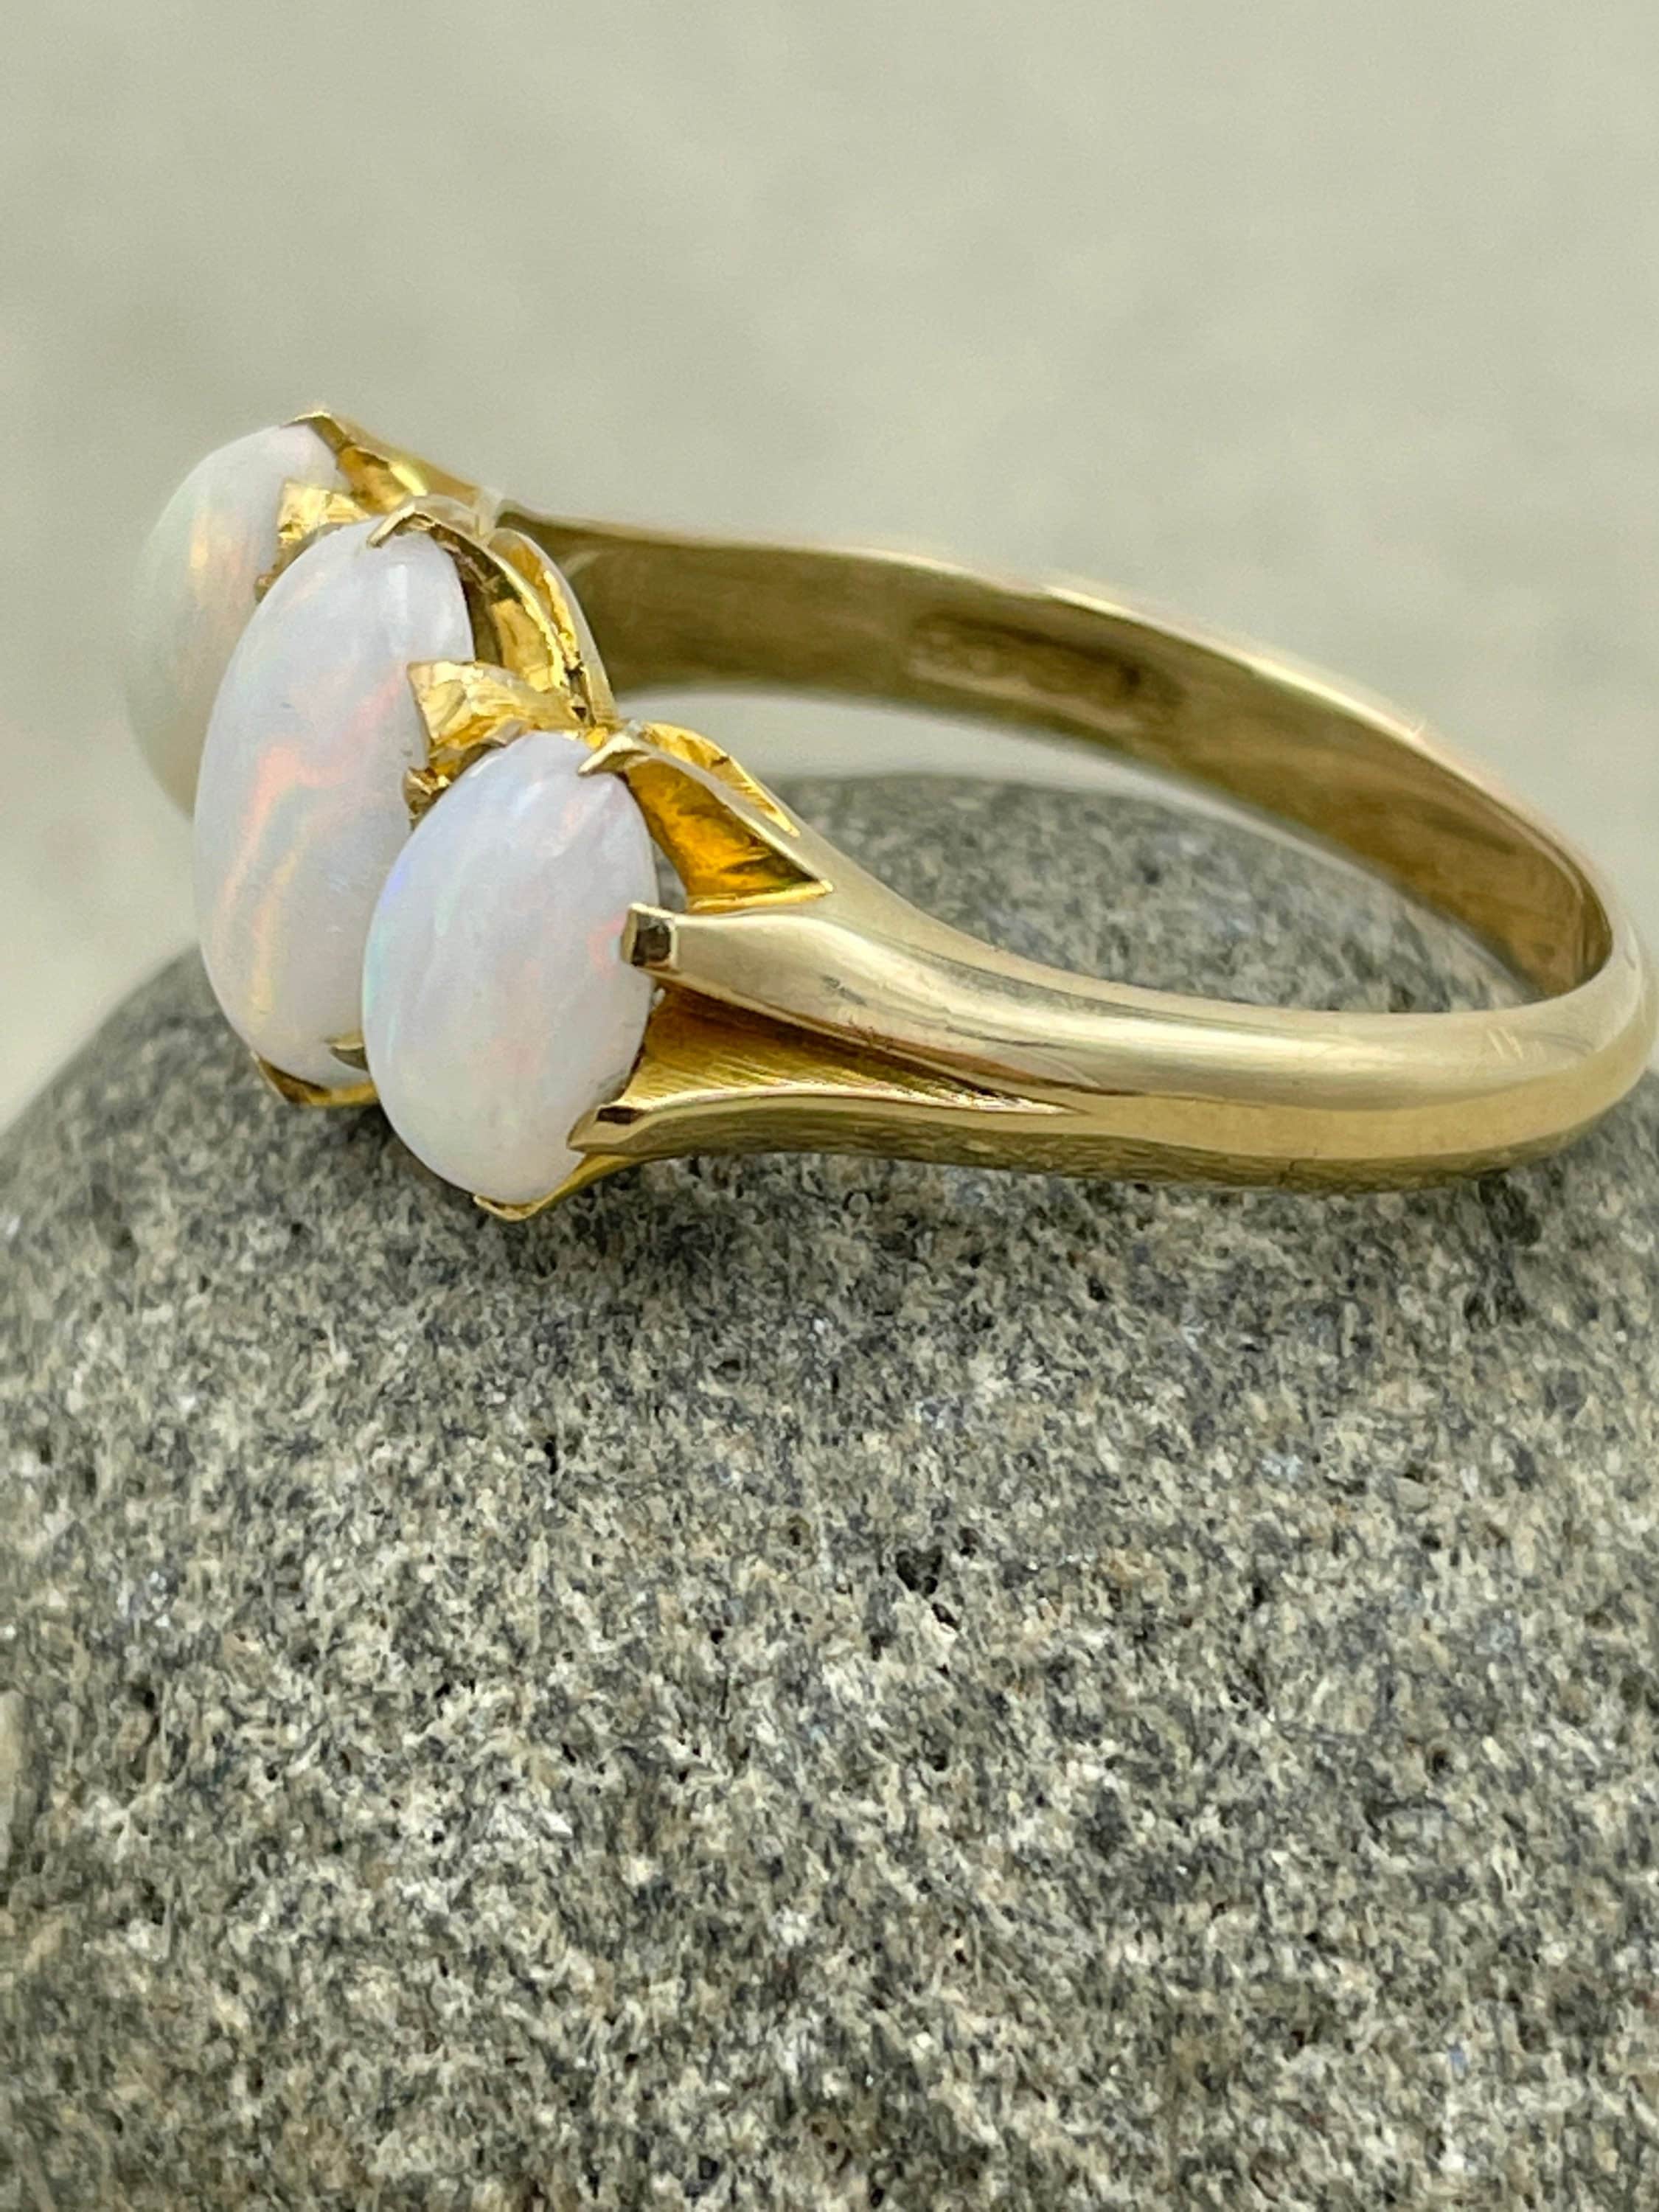 Antique 18ct Gold 3 stone Opal cabochon dress ring, English c1910s 18K gold